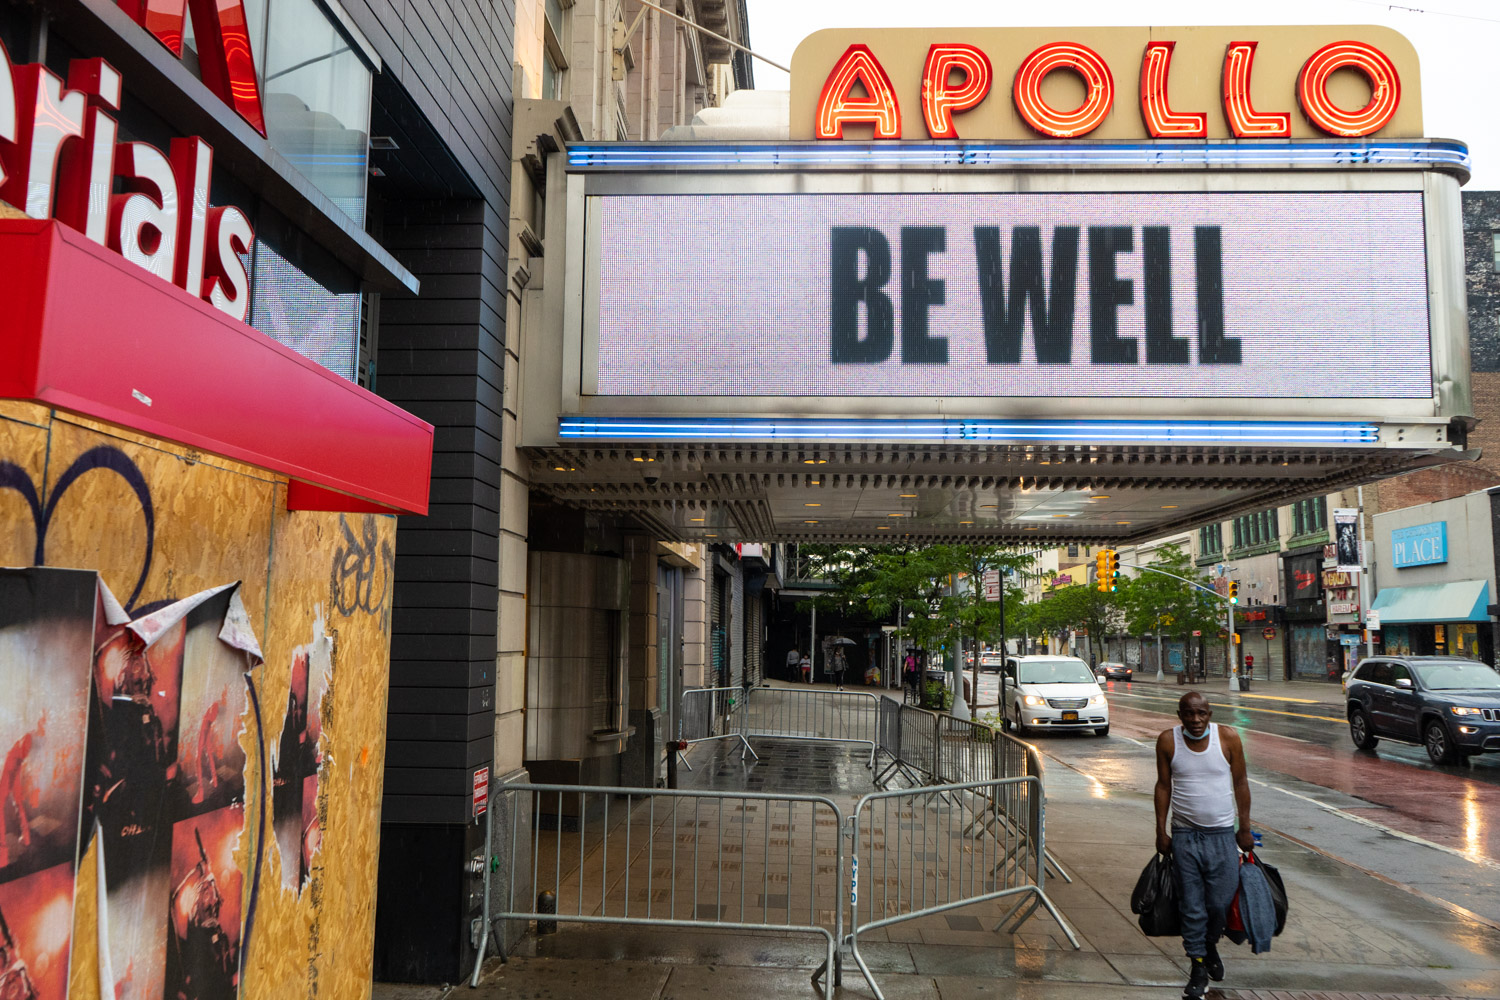 June 3, 2020: A boarded up Blick Art Materials store next to the Apollo Theater, 253 West 125th Street, Harlem, New York, New York. © Camilo José Vergara